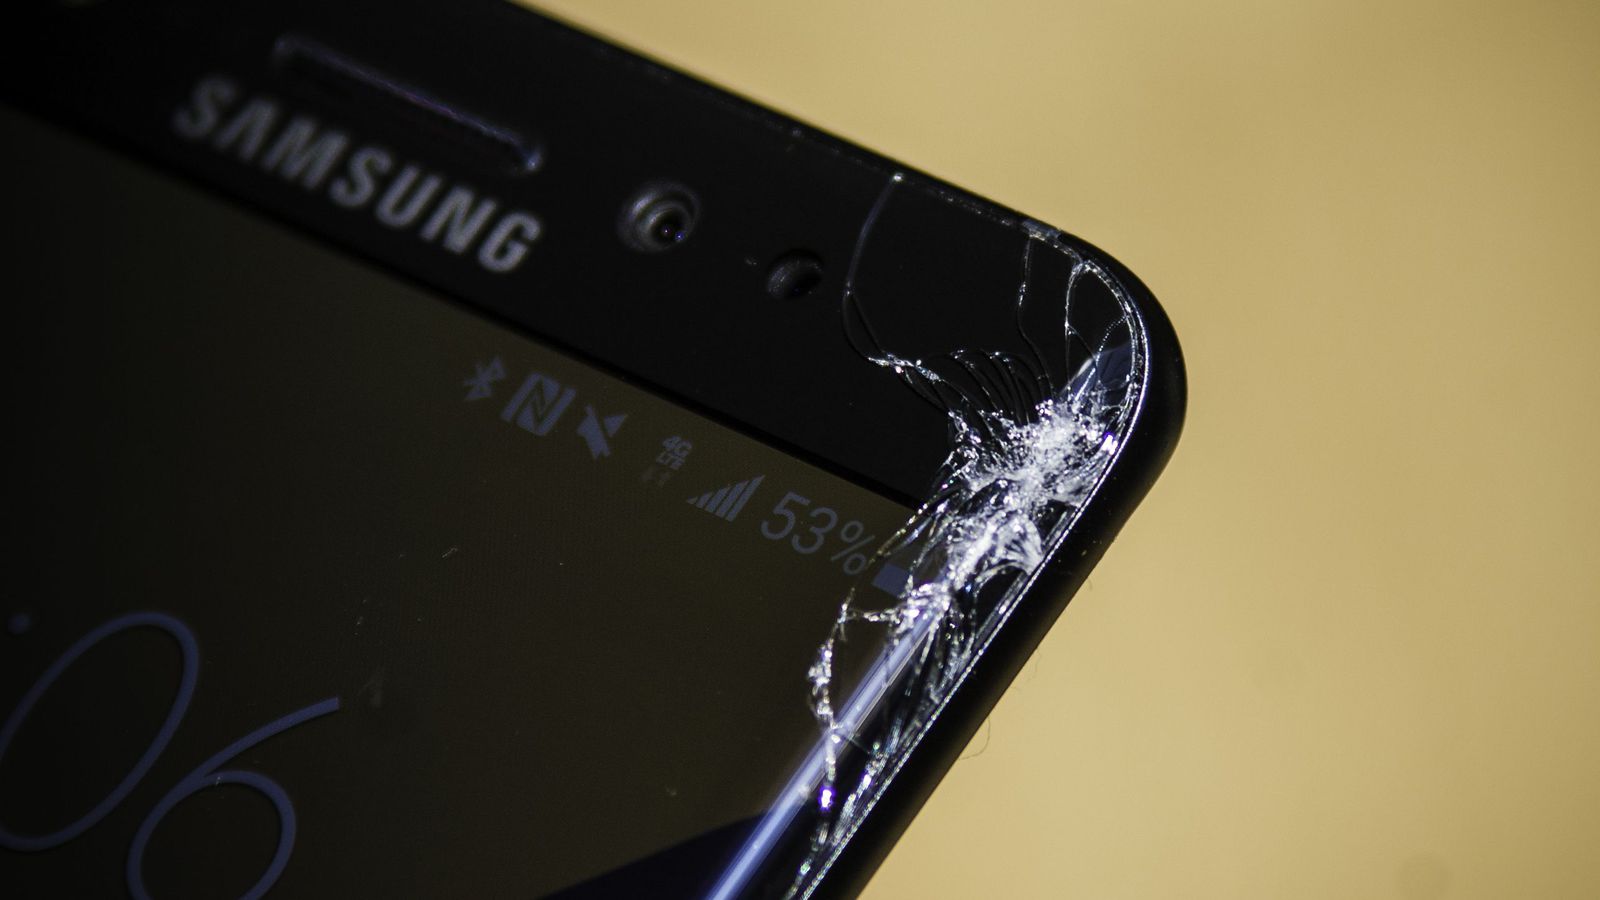 How to enable debugging with a broken screen |